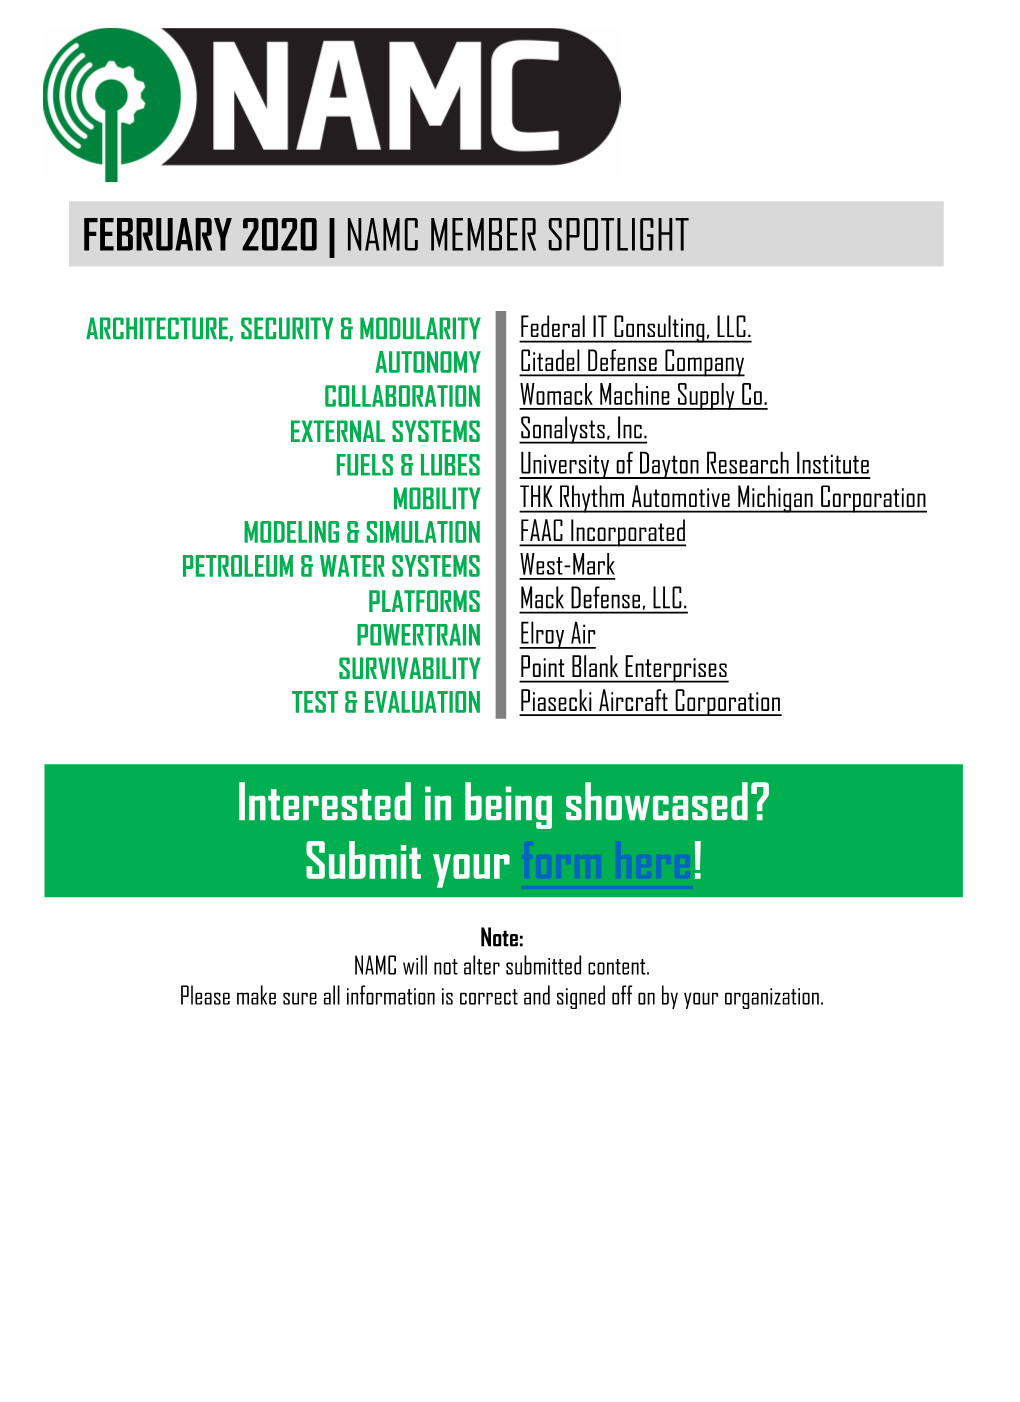 Interested in Being Showcased? Submit Your Form Here!